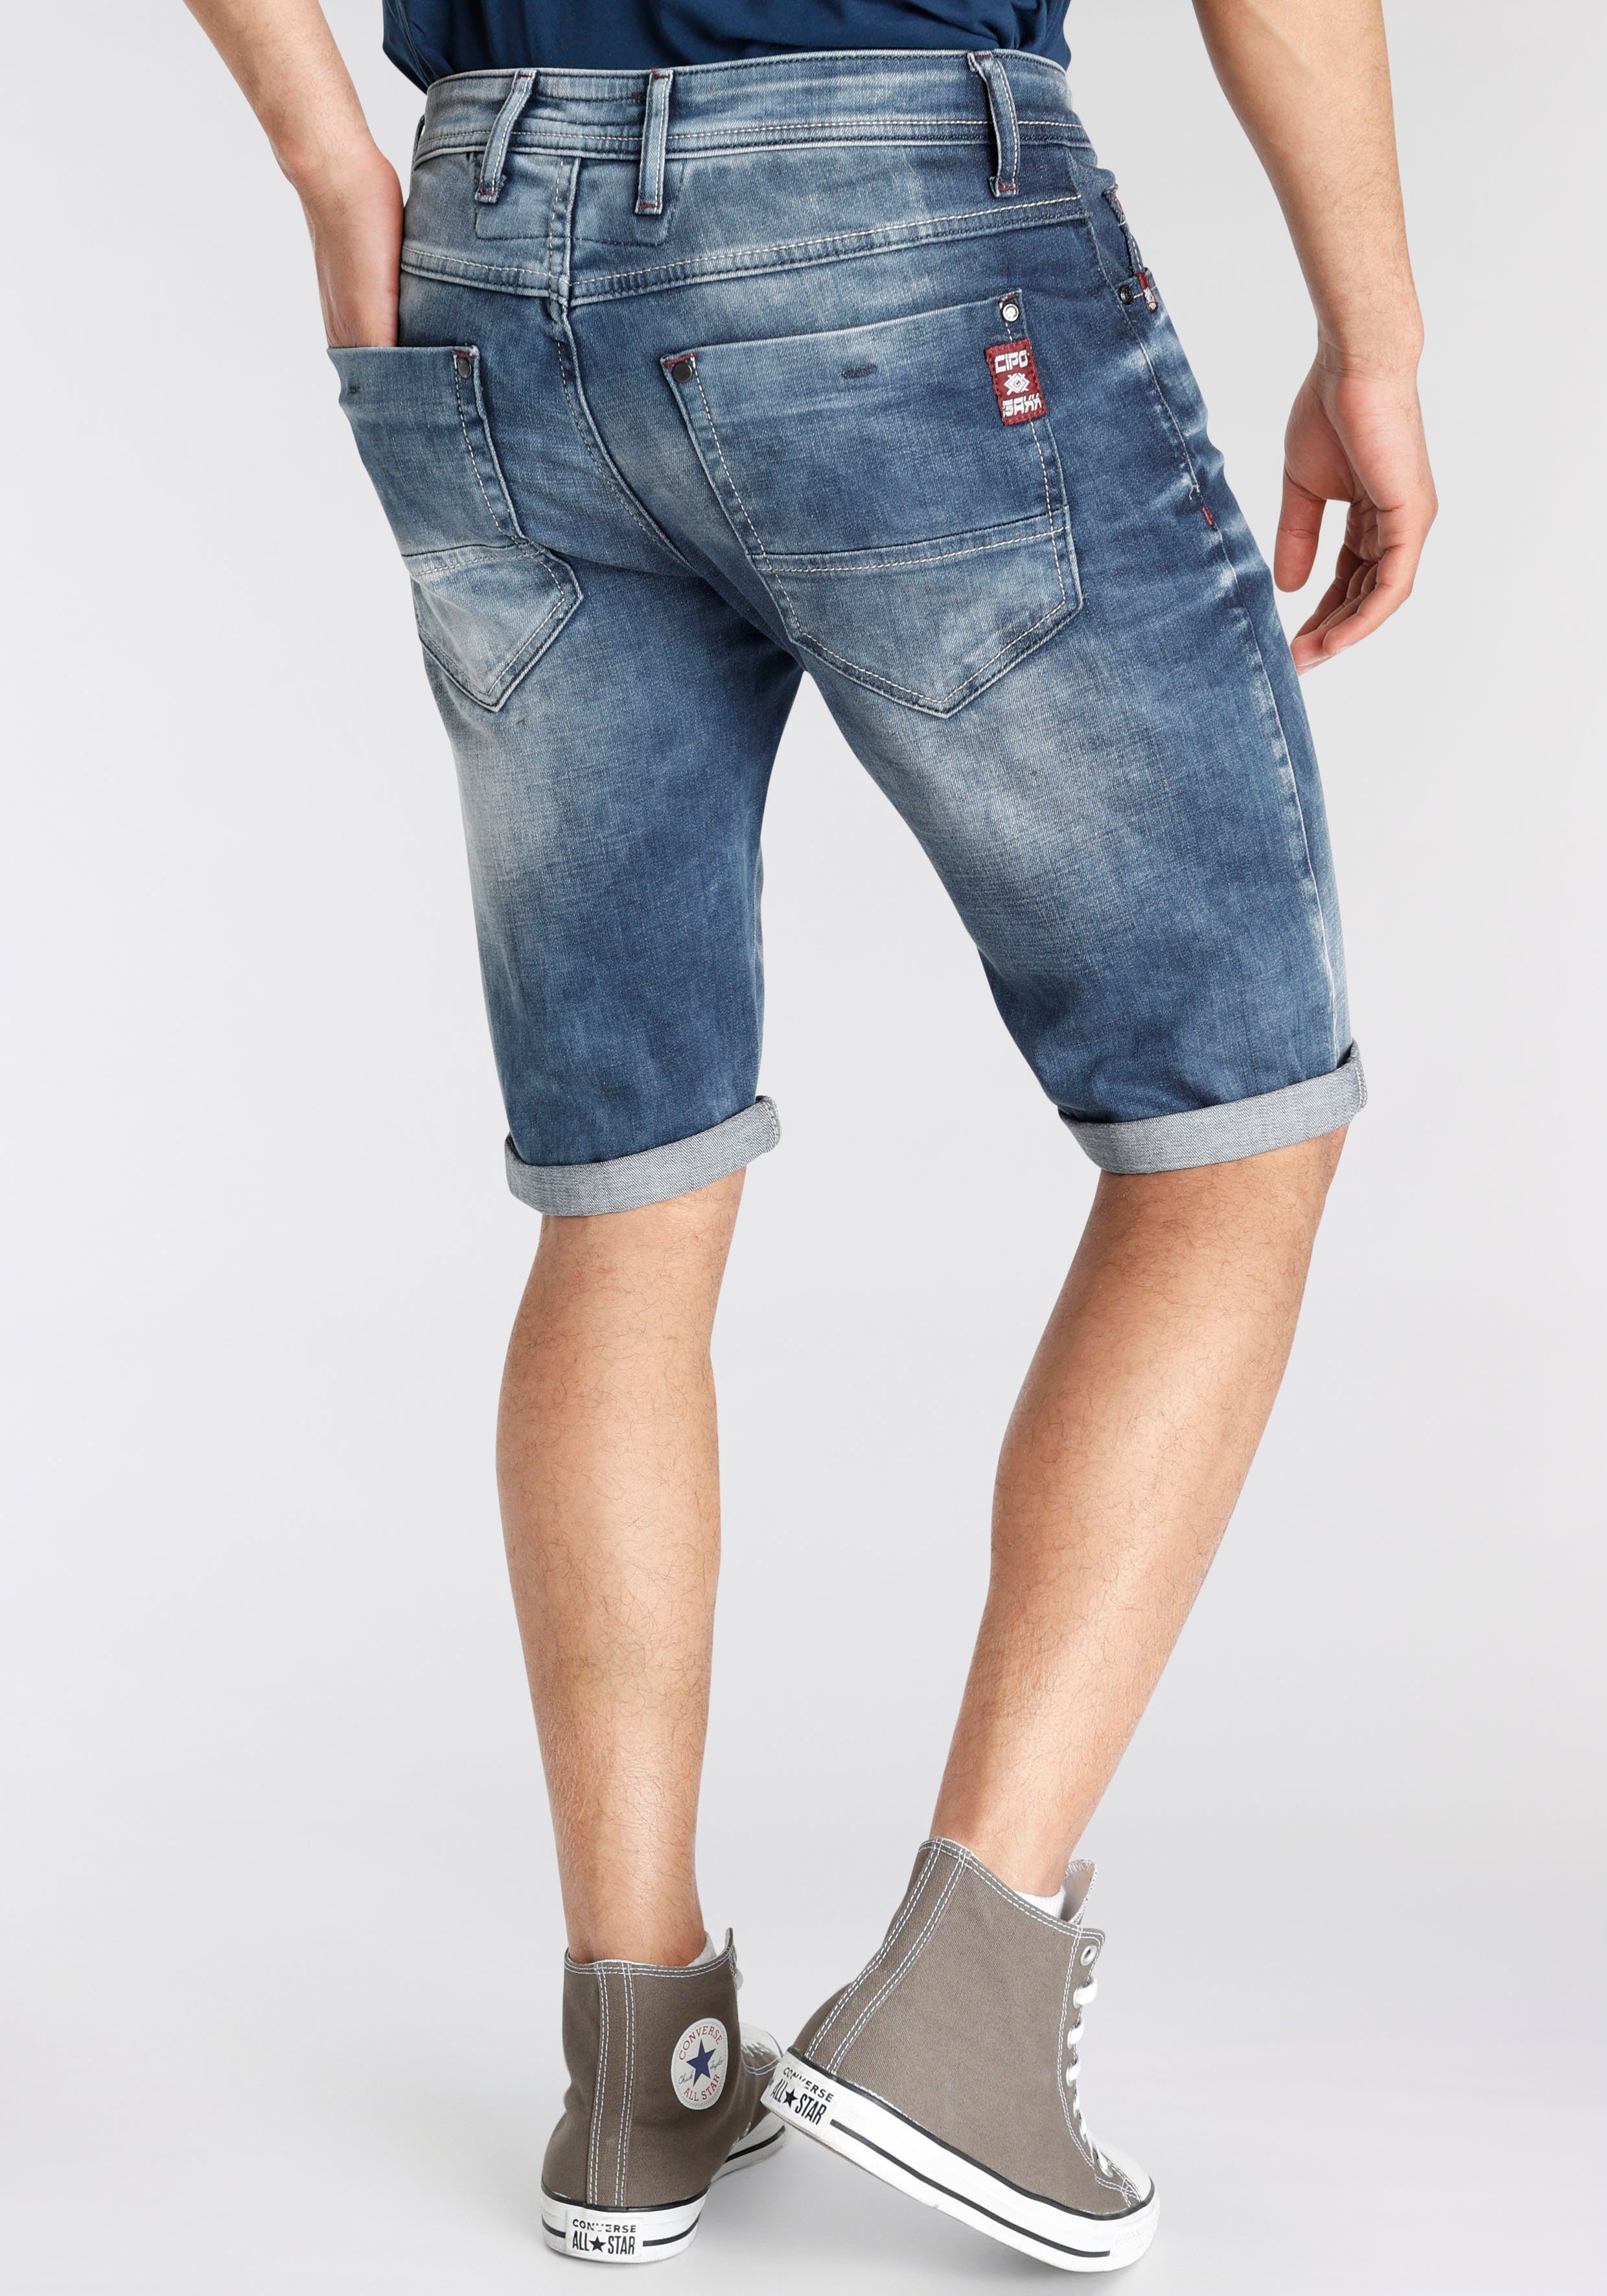 Cipo & Jeansshorts Baxx blue used